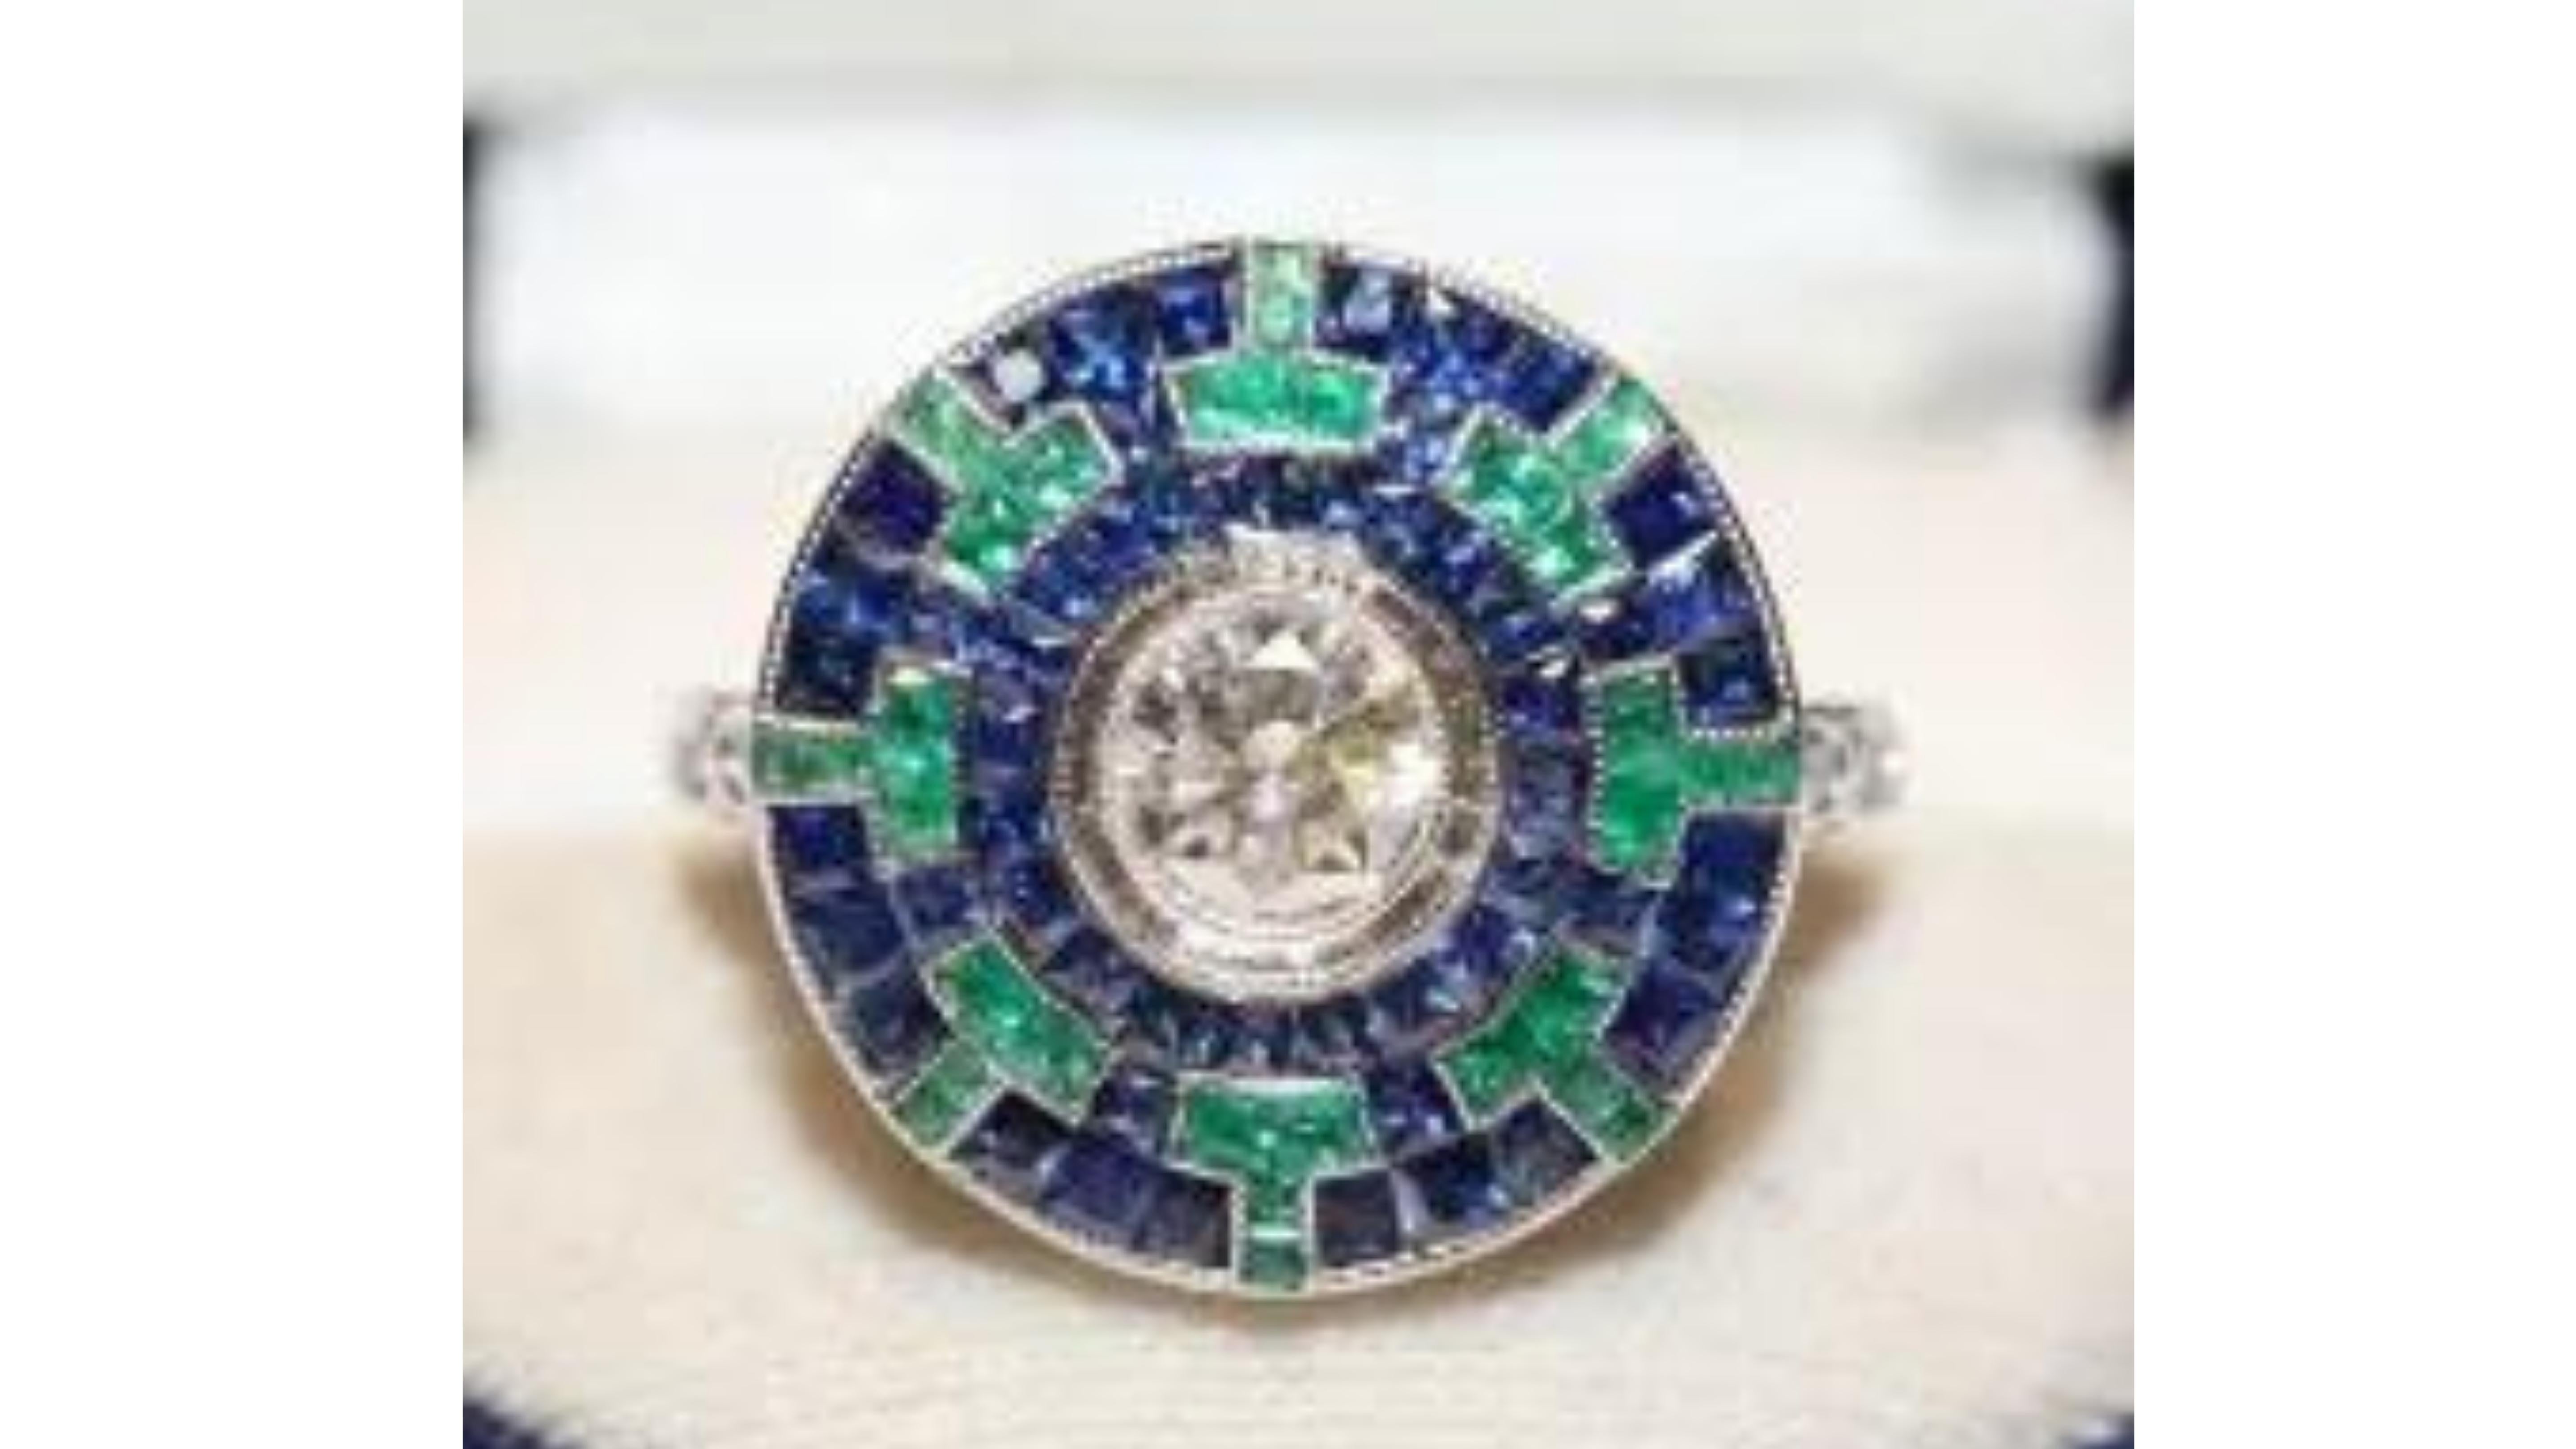 Art Deco Style Emerald Sapphire Diamond Ring 18k White Gold

This unique ring stands out with 32   Blue Sapphires  28  Emeralds wit a White Diamond in centre . This can also be made with other stones too and notice the diamonds down side of the ring